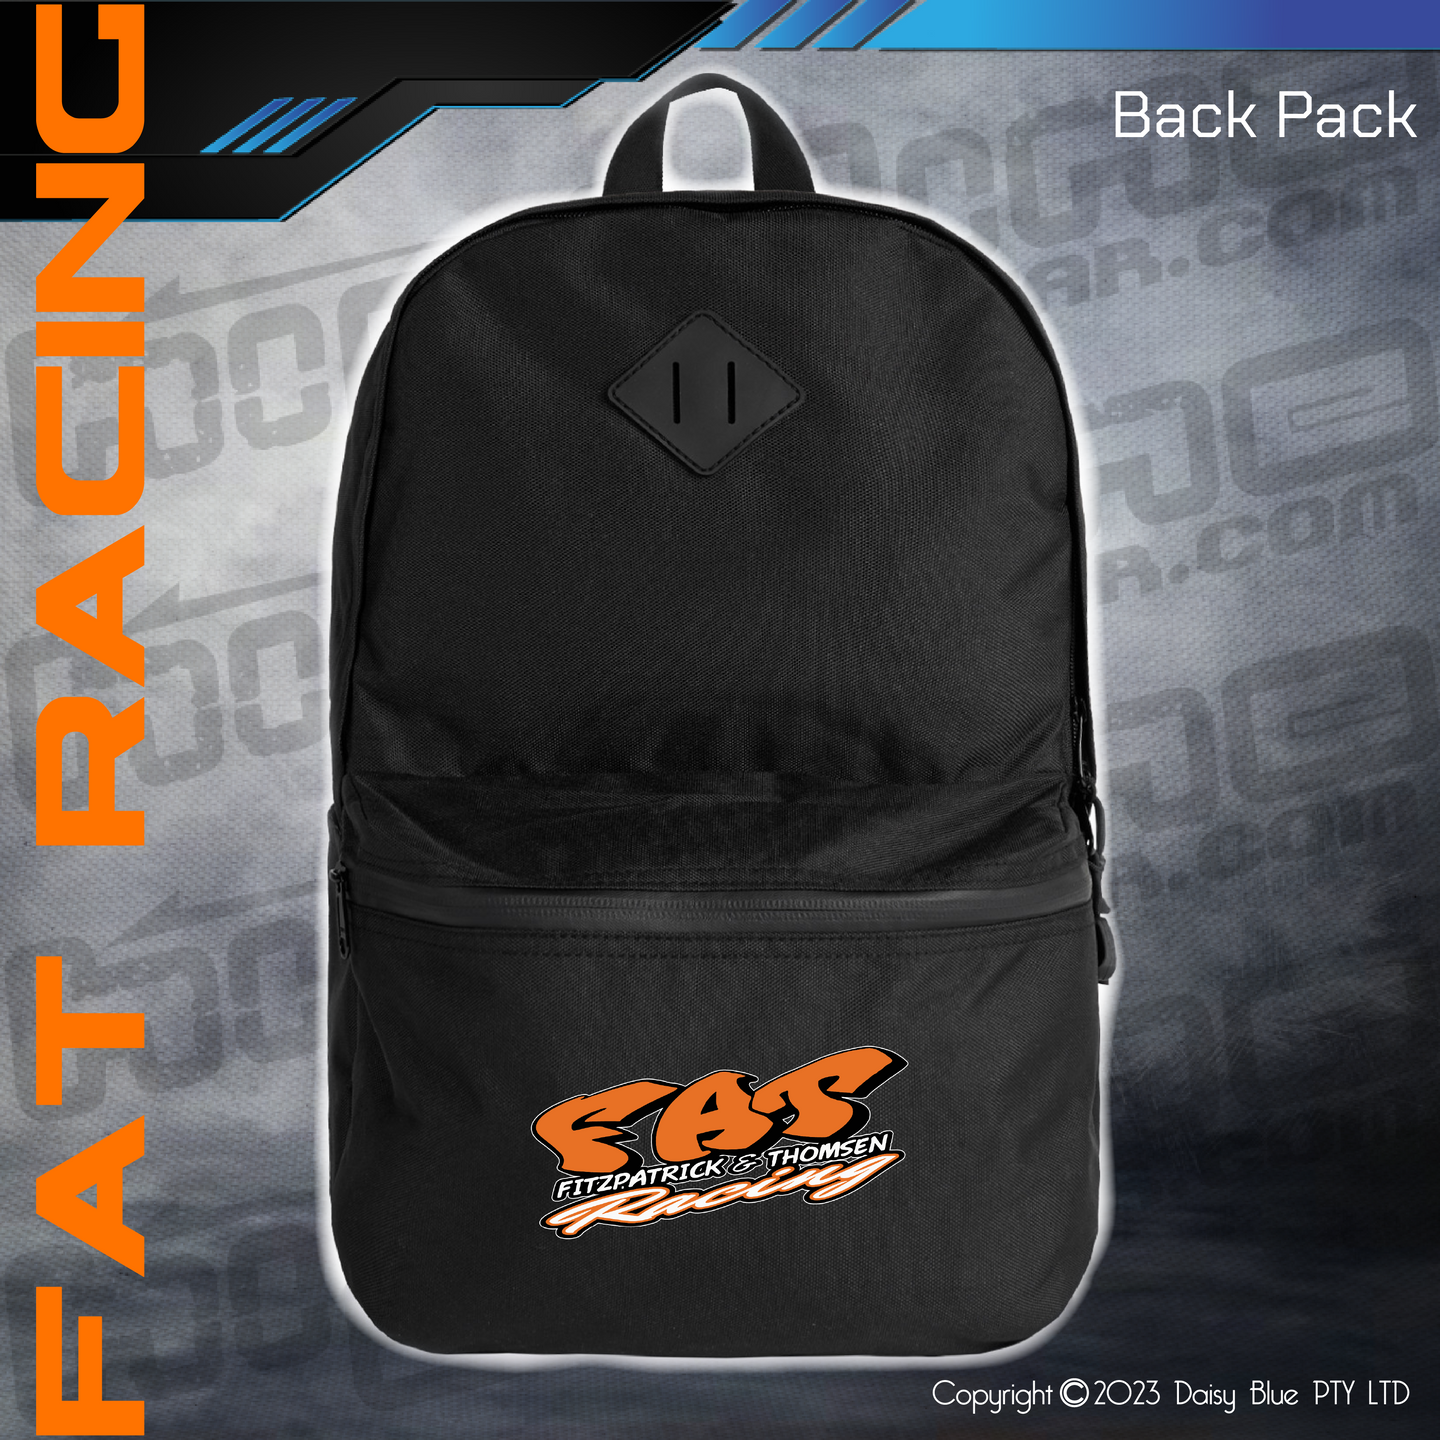 Back Pack - FAT Racing